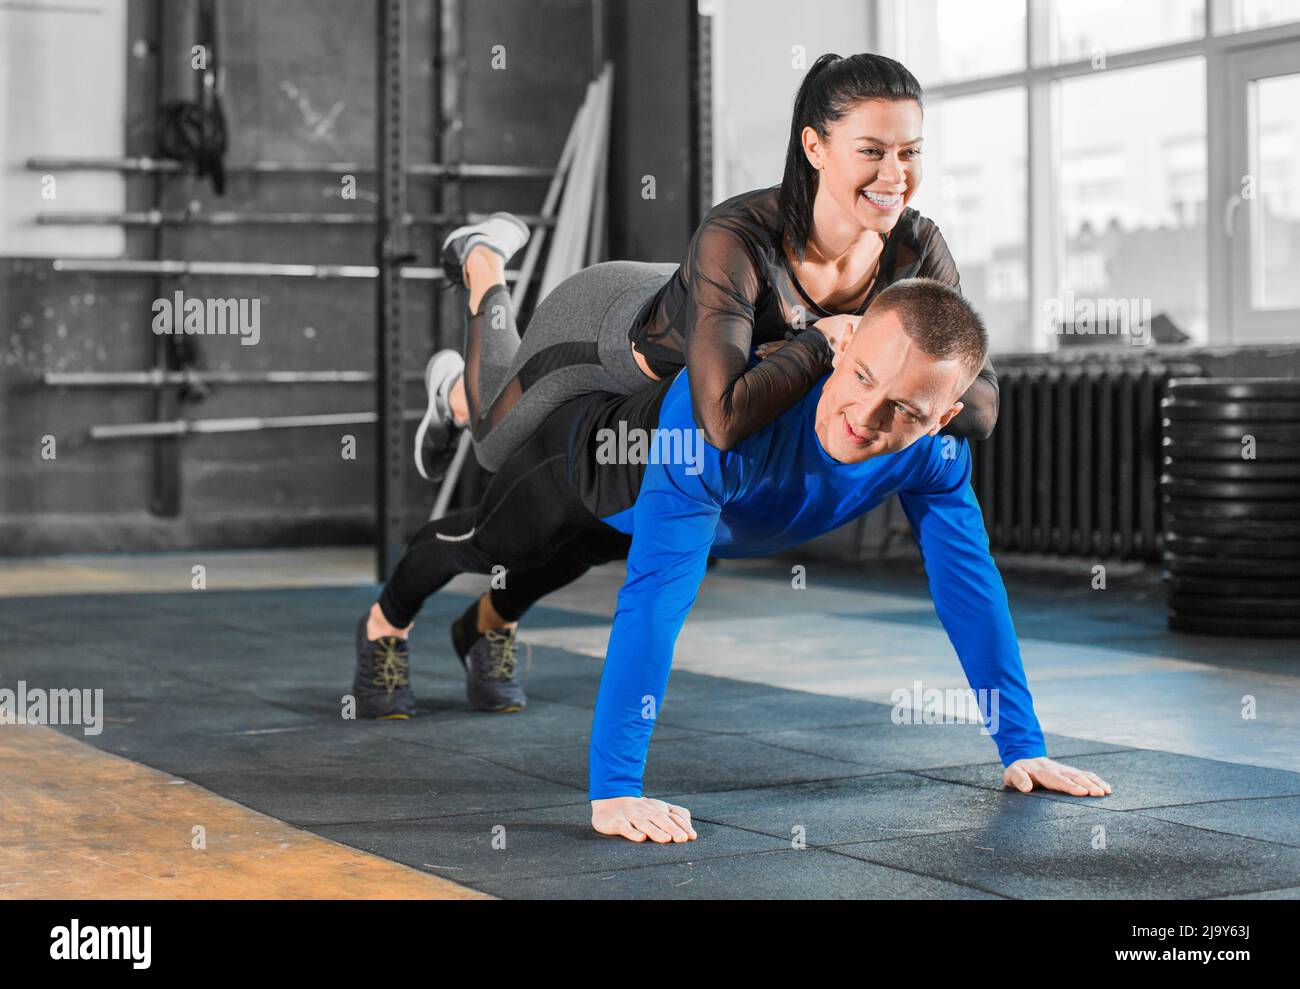 Push-ups with woman on back. Healthy couple in gym, workout with own body weight. Active and sporty lifestyle concept Stock Photo